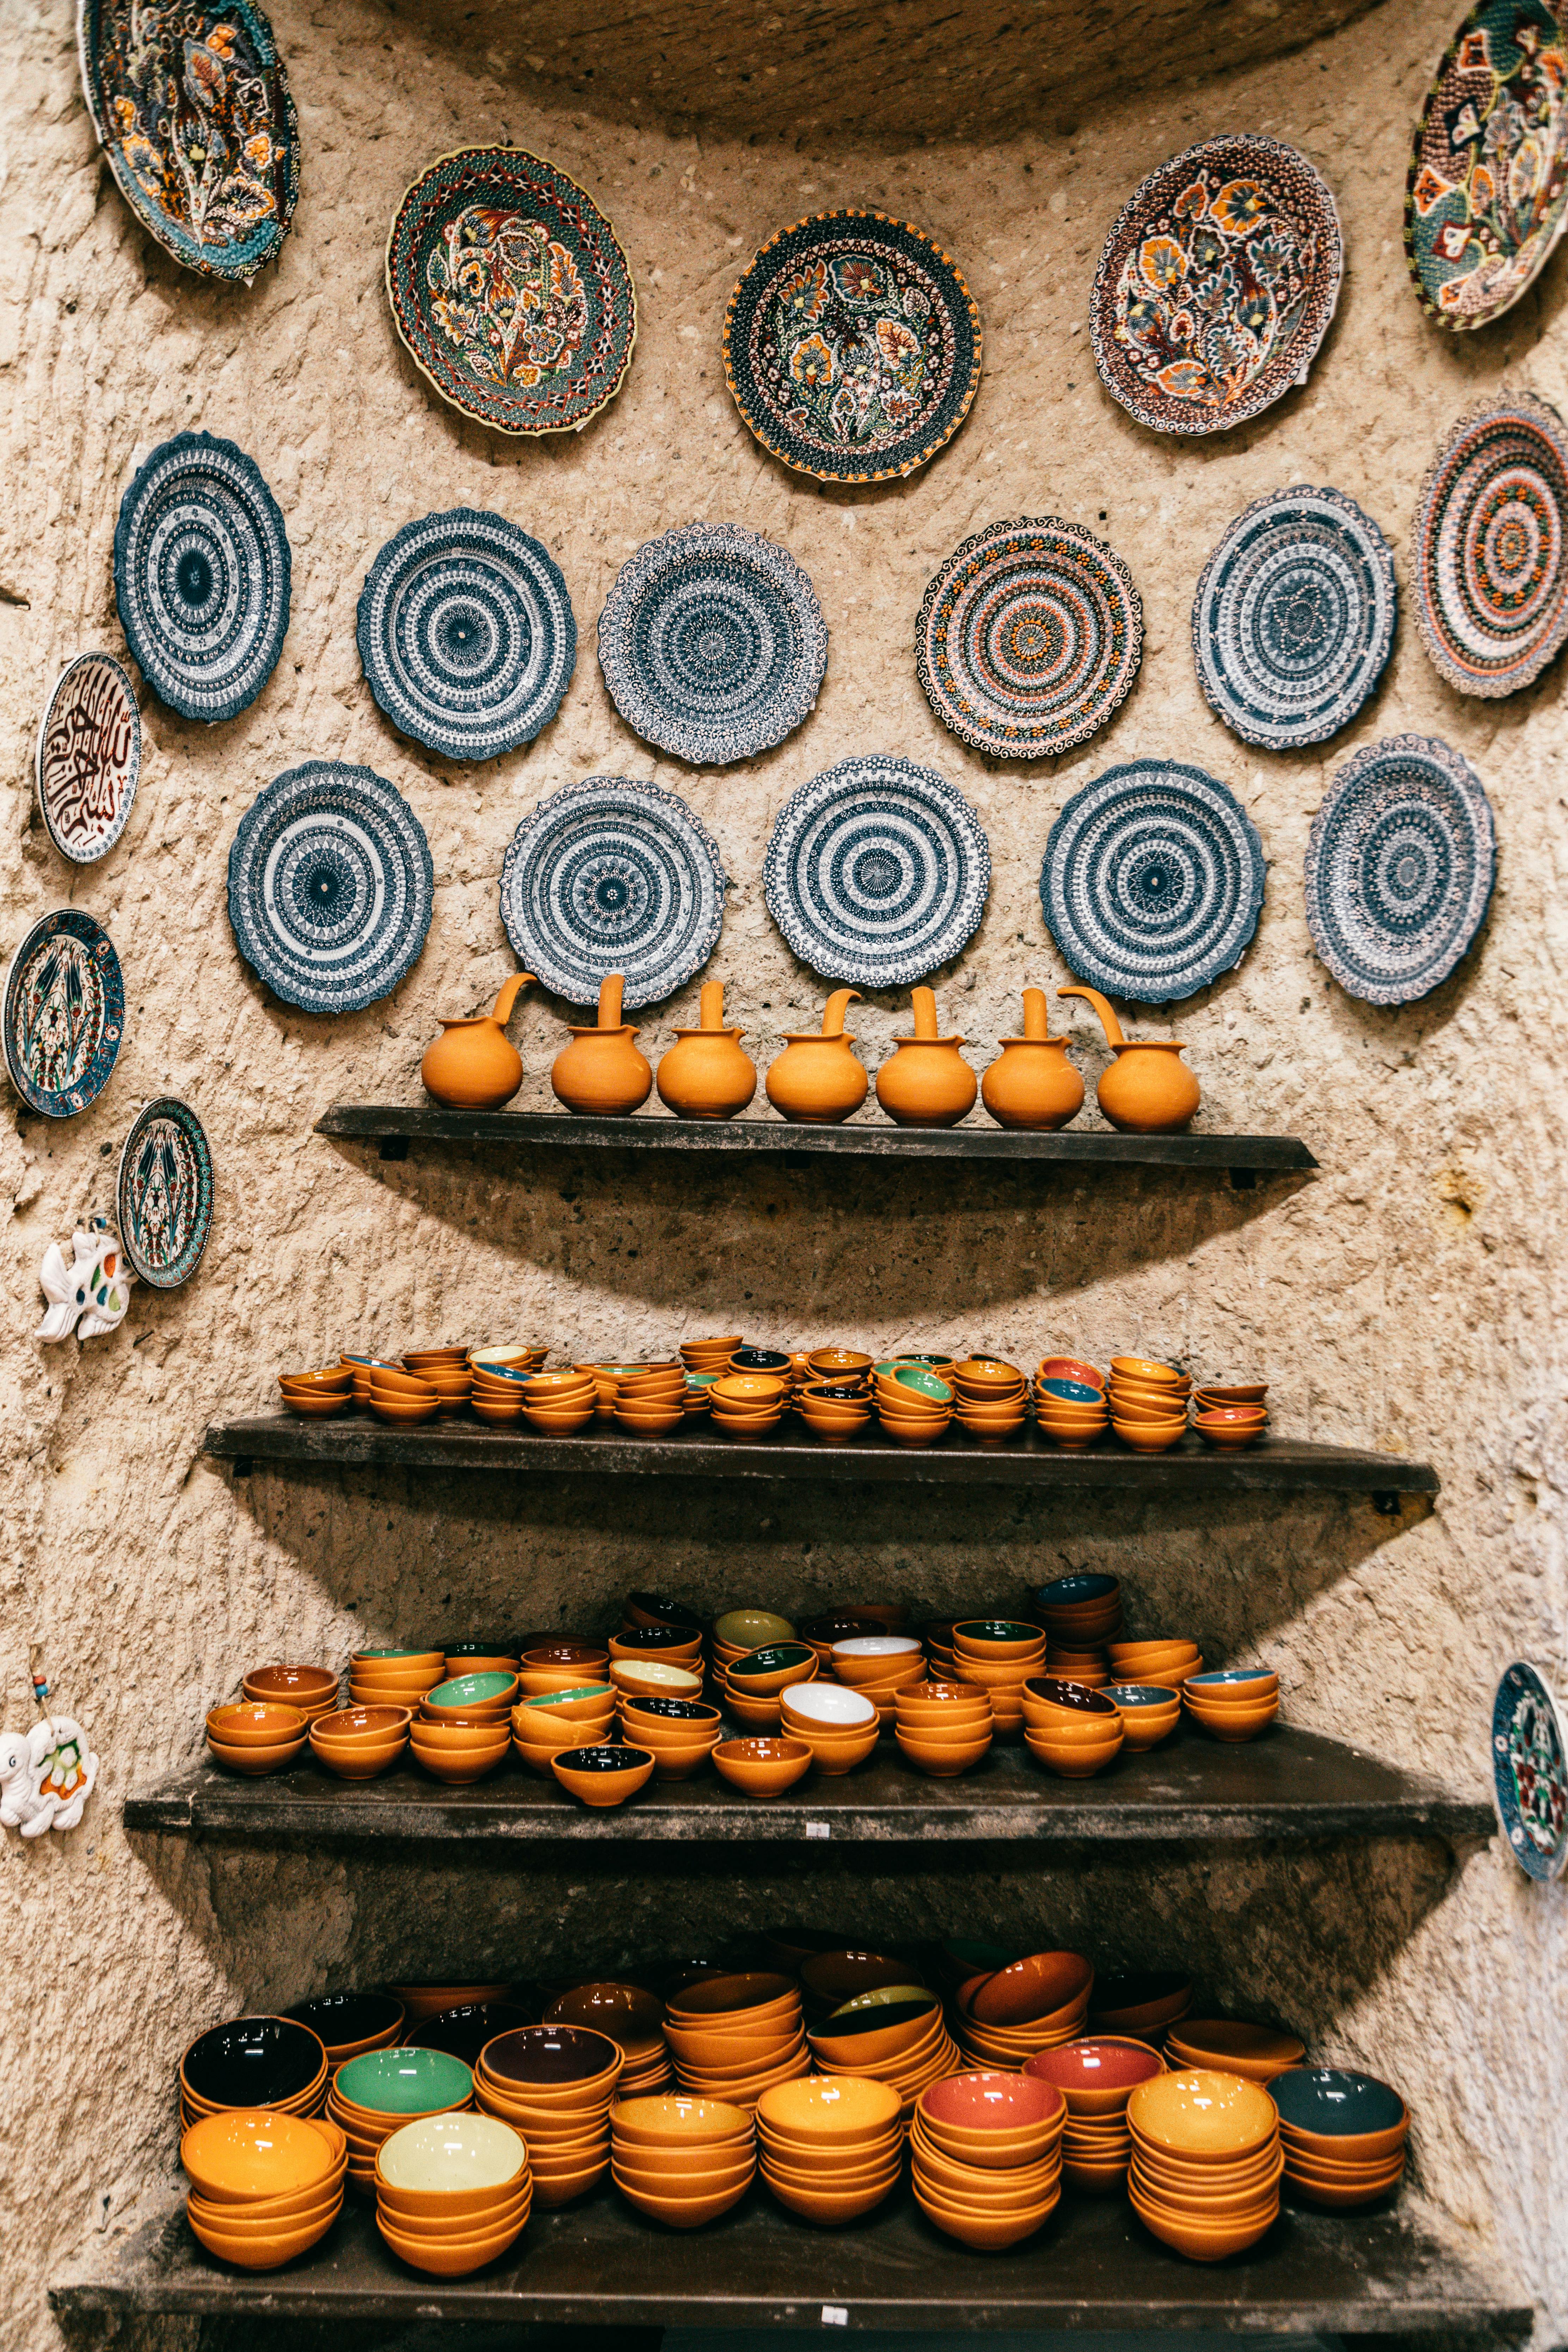 Shelves with different ceramic bowls near stone wall